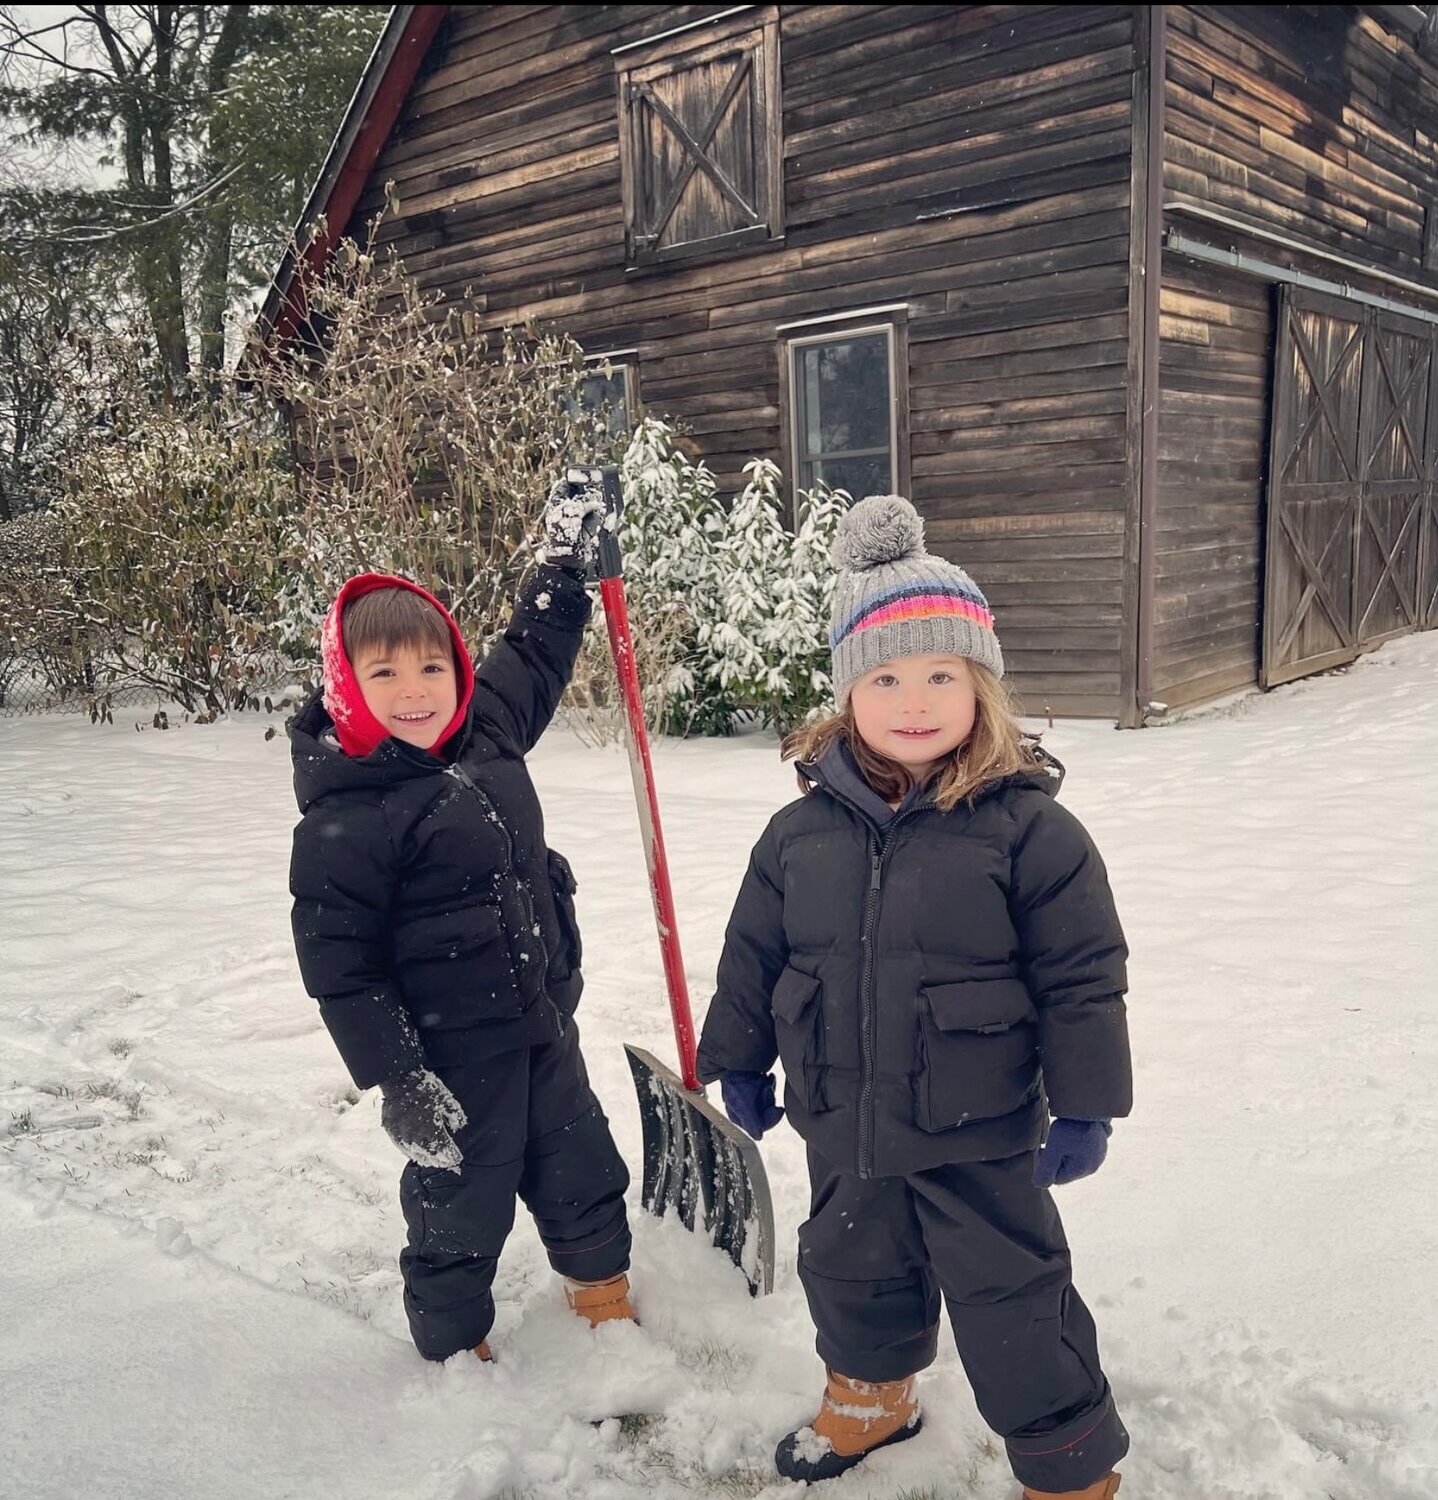 Ford and Charlotte McCurdy, twins from Lynbrook, love the snow, but before a couple inches of the white stuff fell last week, it had been 700 days since they had been able to play in it. Experts, however, say a snowy winter is not off the table this year.